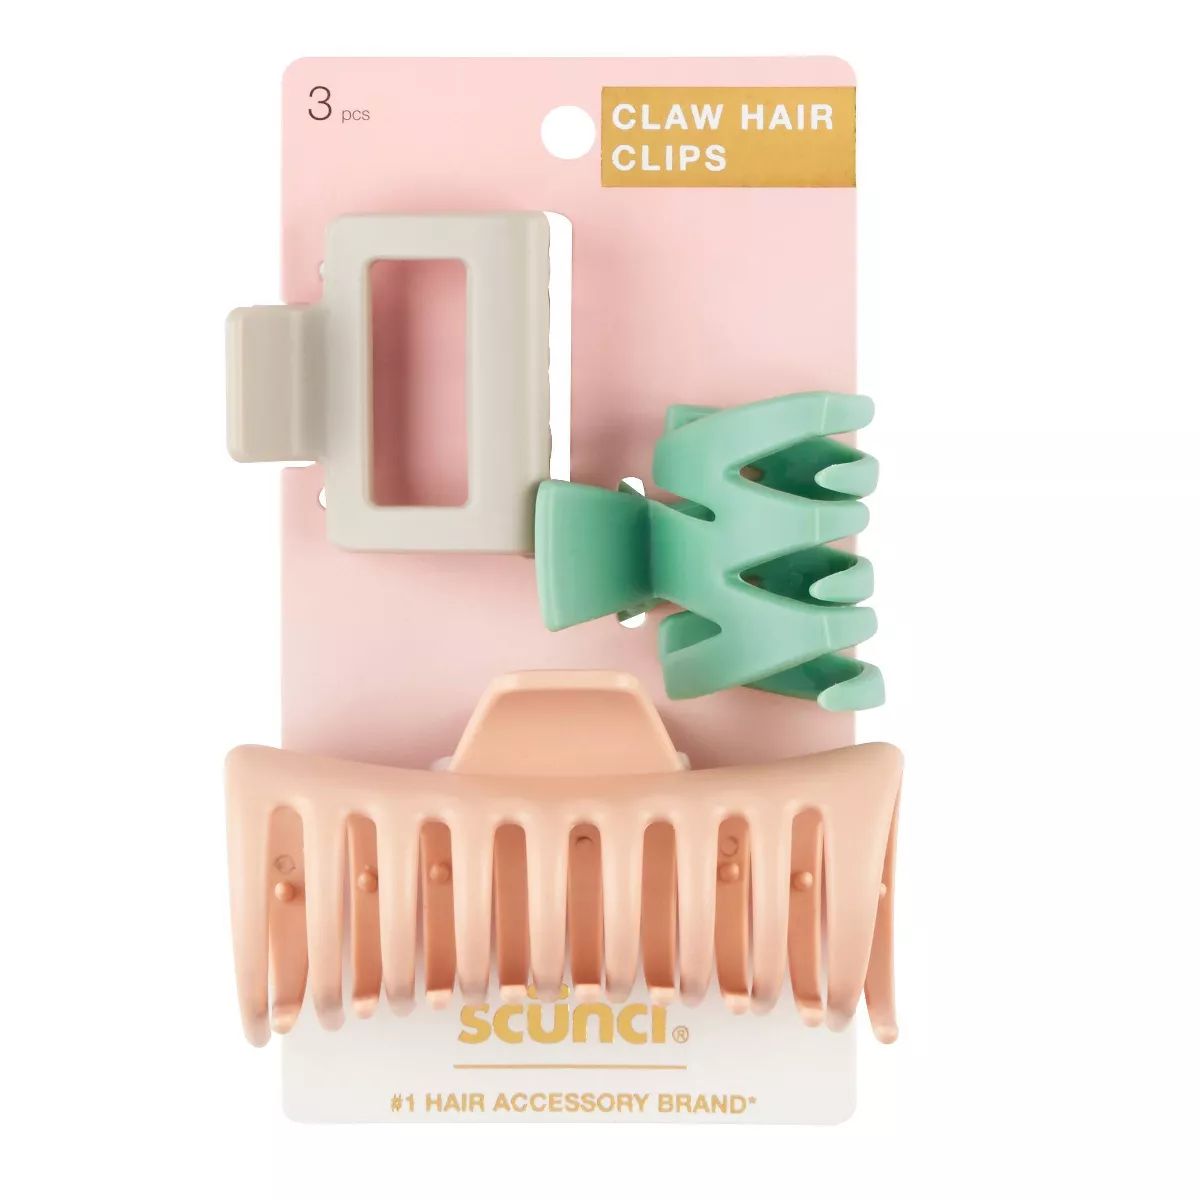 scunci Jaw Hair Clips - 3ct | Target